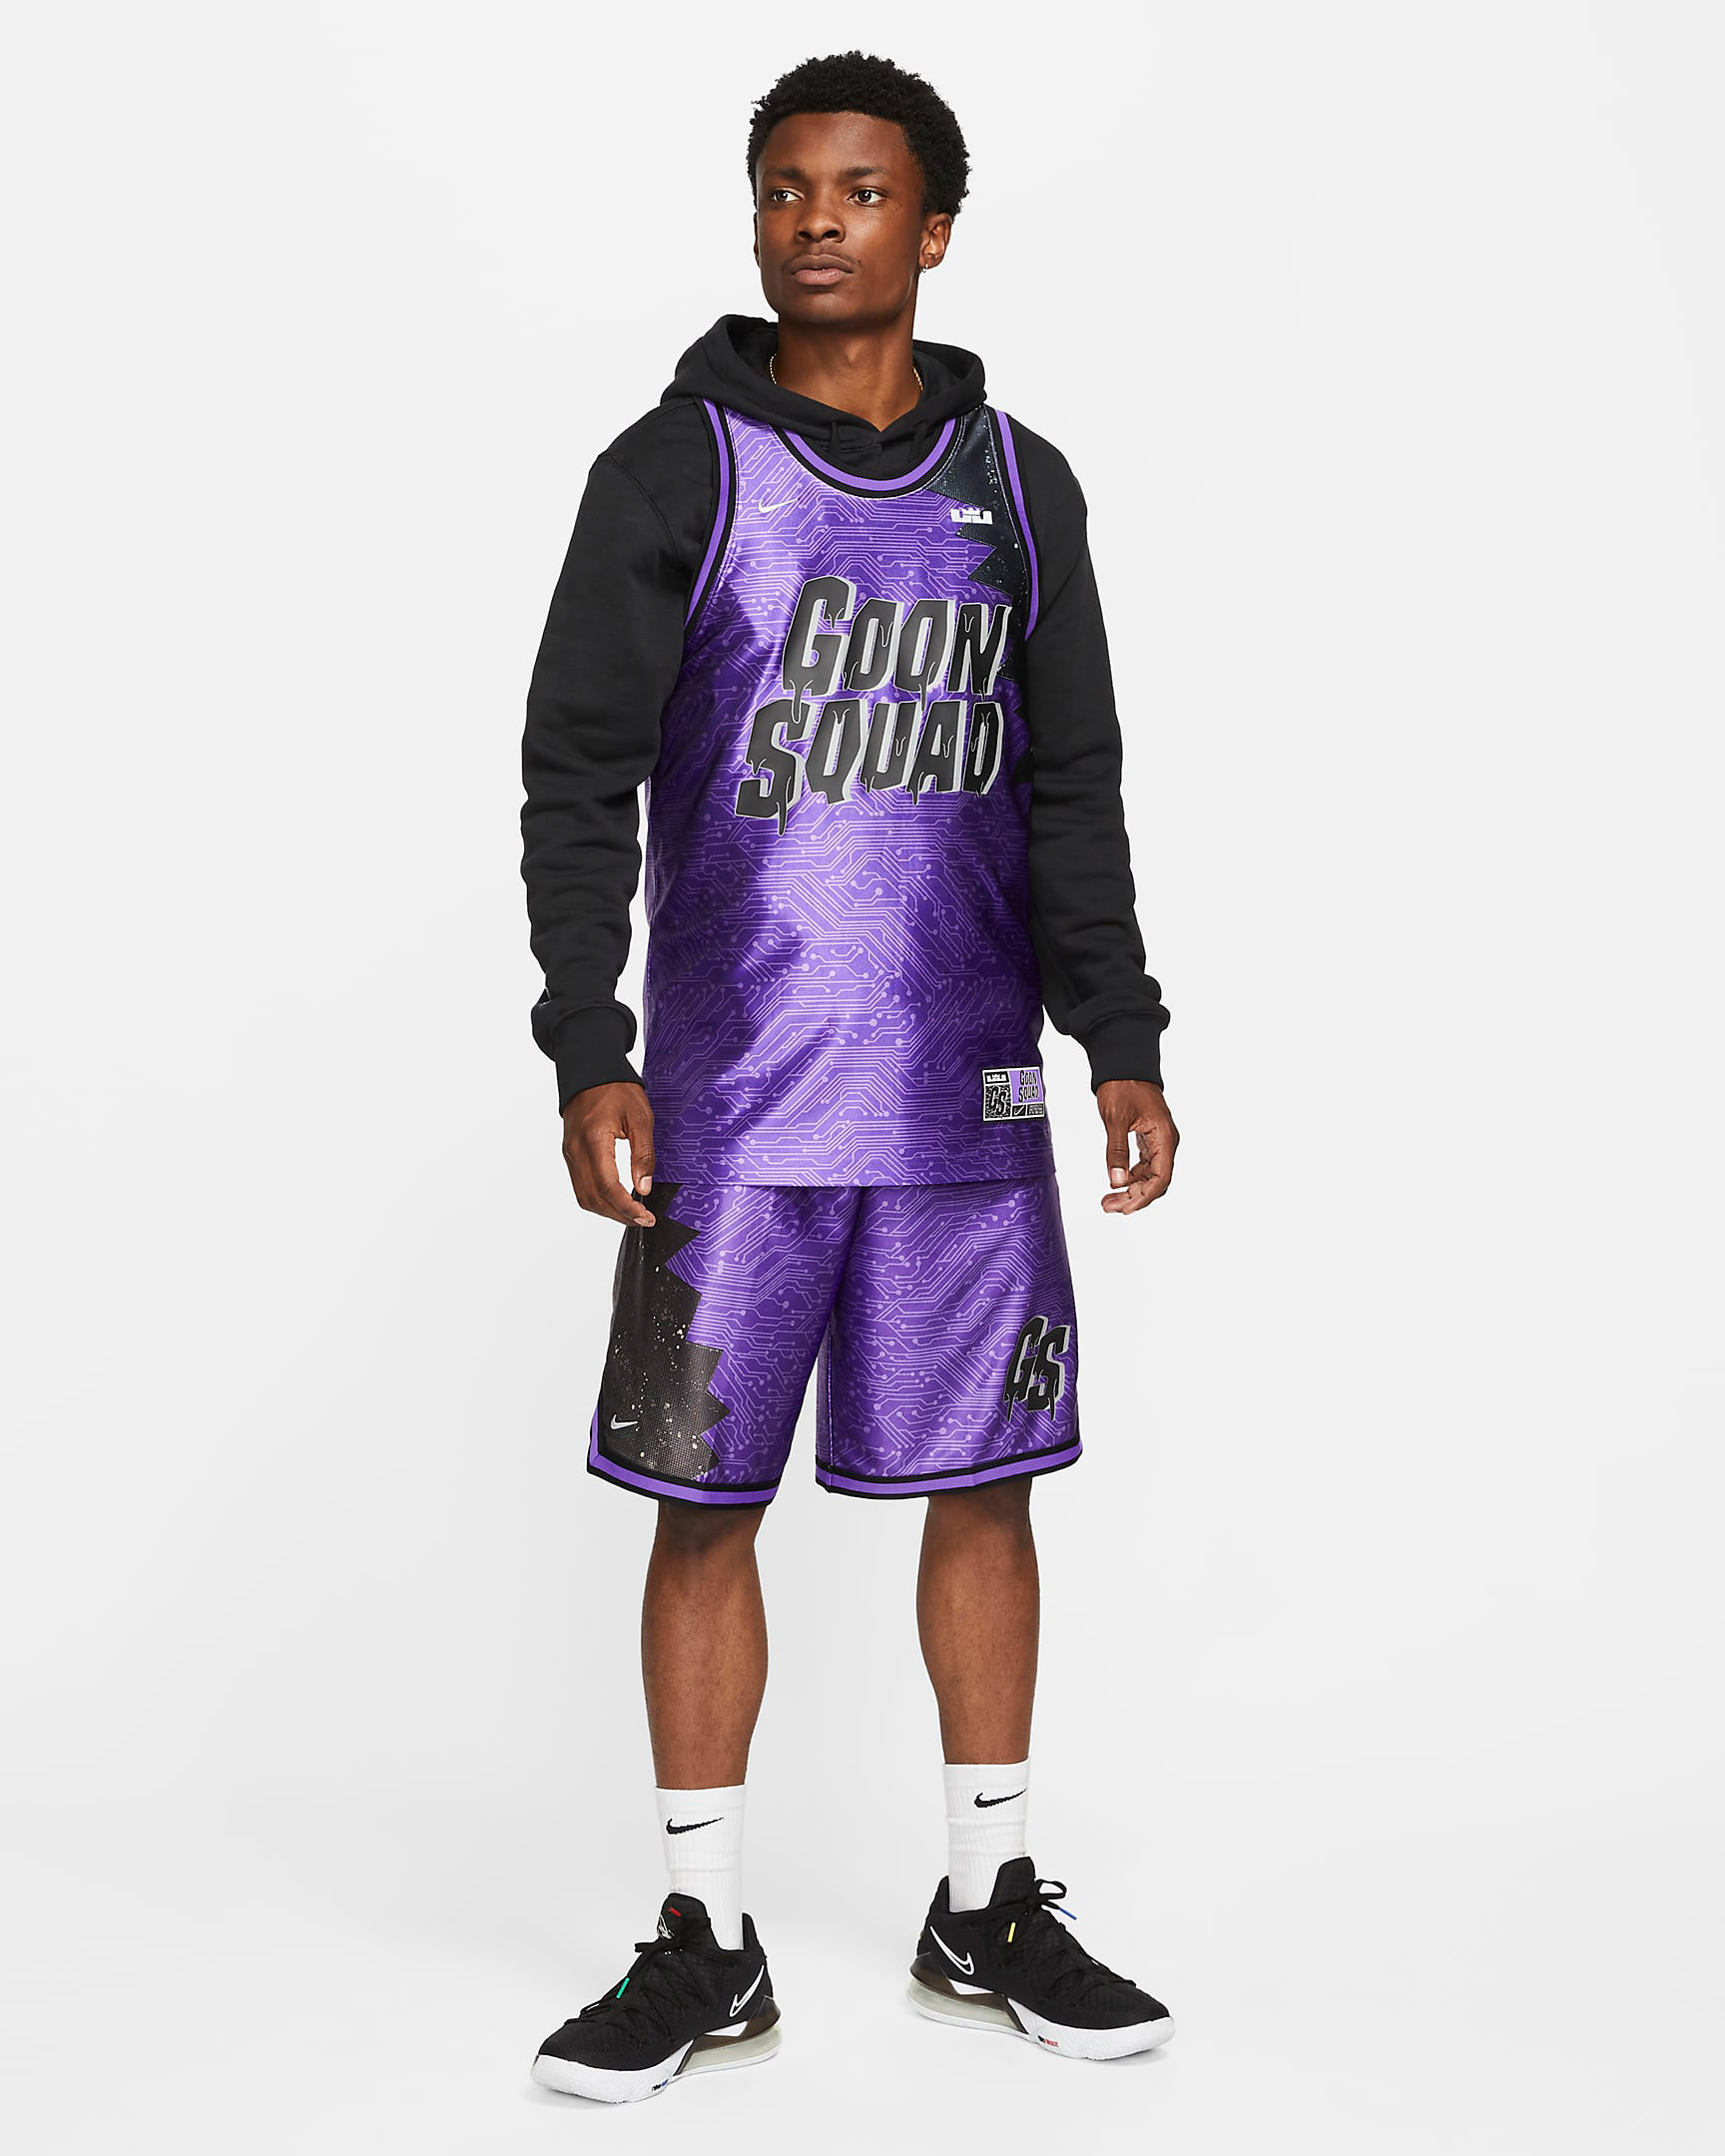 Nike LeBron Space Jam Goon Squad Jersey and Shorts